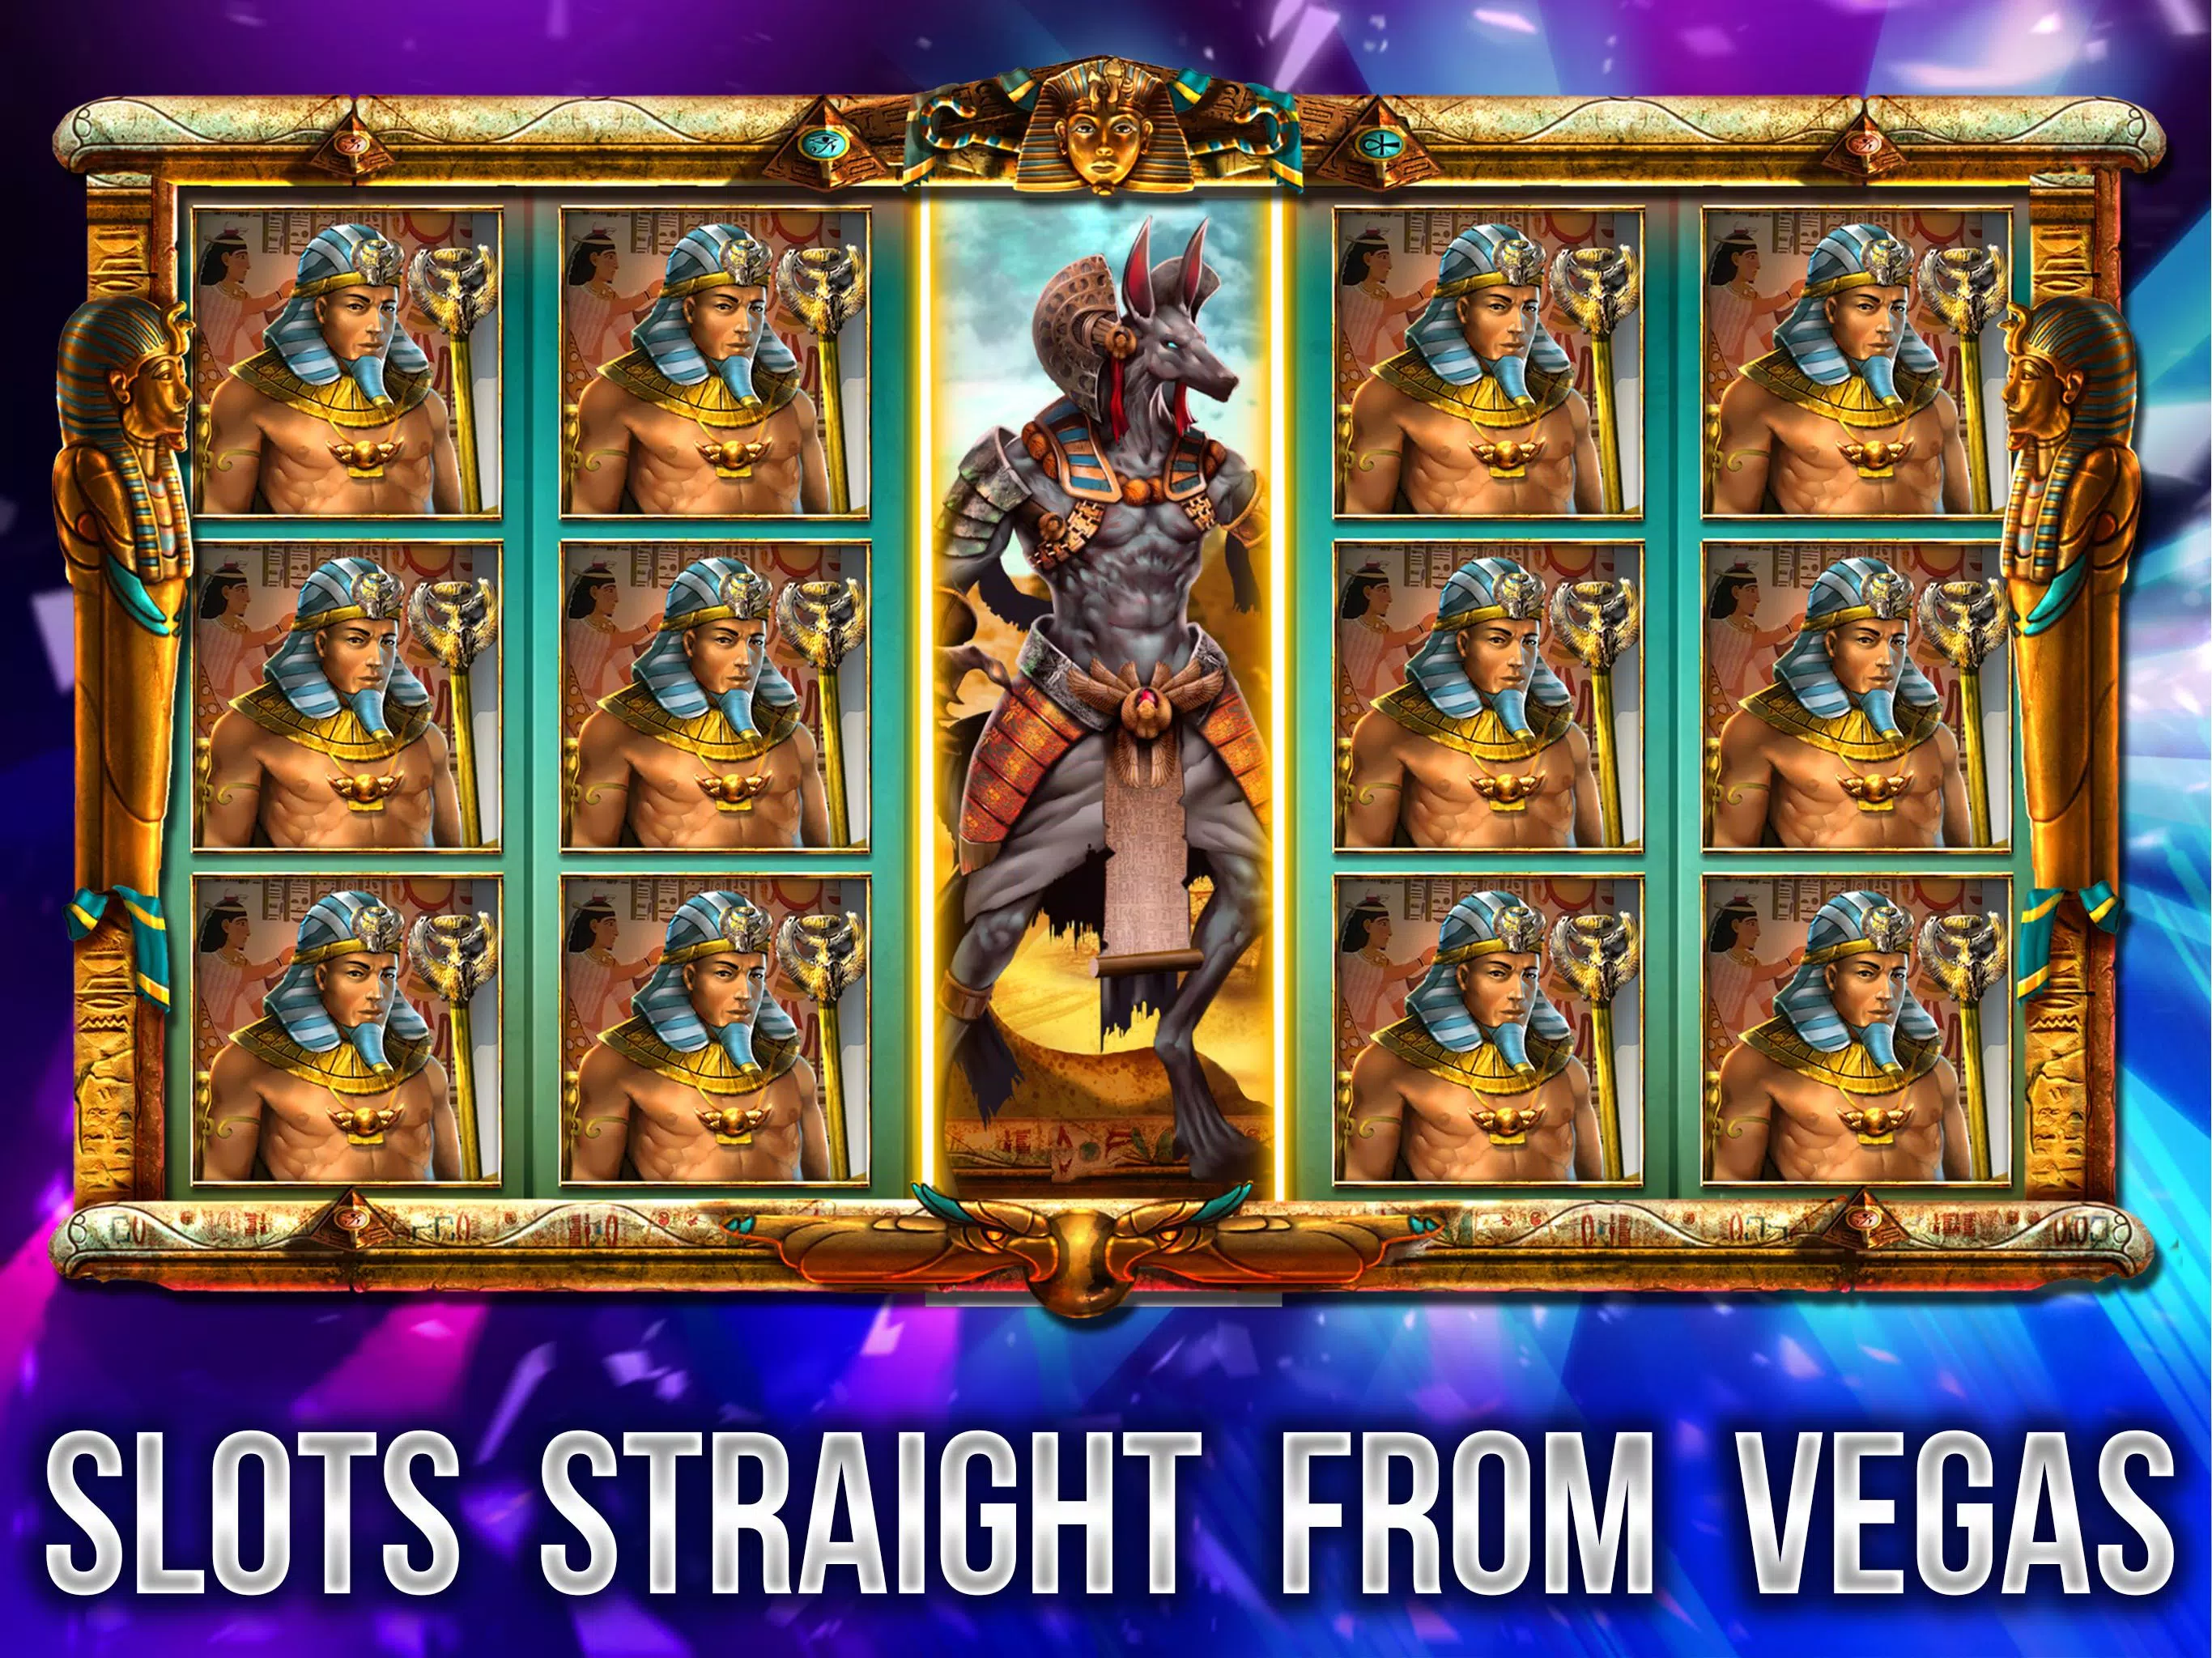 Kingdom Battle Slots Multi Free Slot Machine Free Slots Game Freeslots  Rider Armor Joust Vegas Tablets Mobile Saga Top Casino Games Kindle New  2015::Appstore for Android